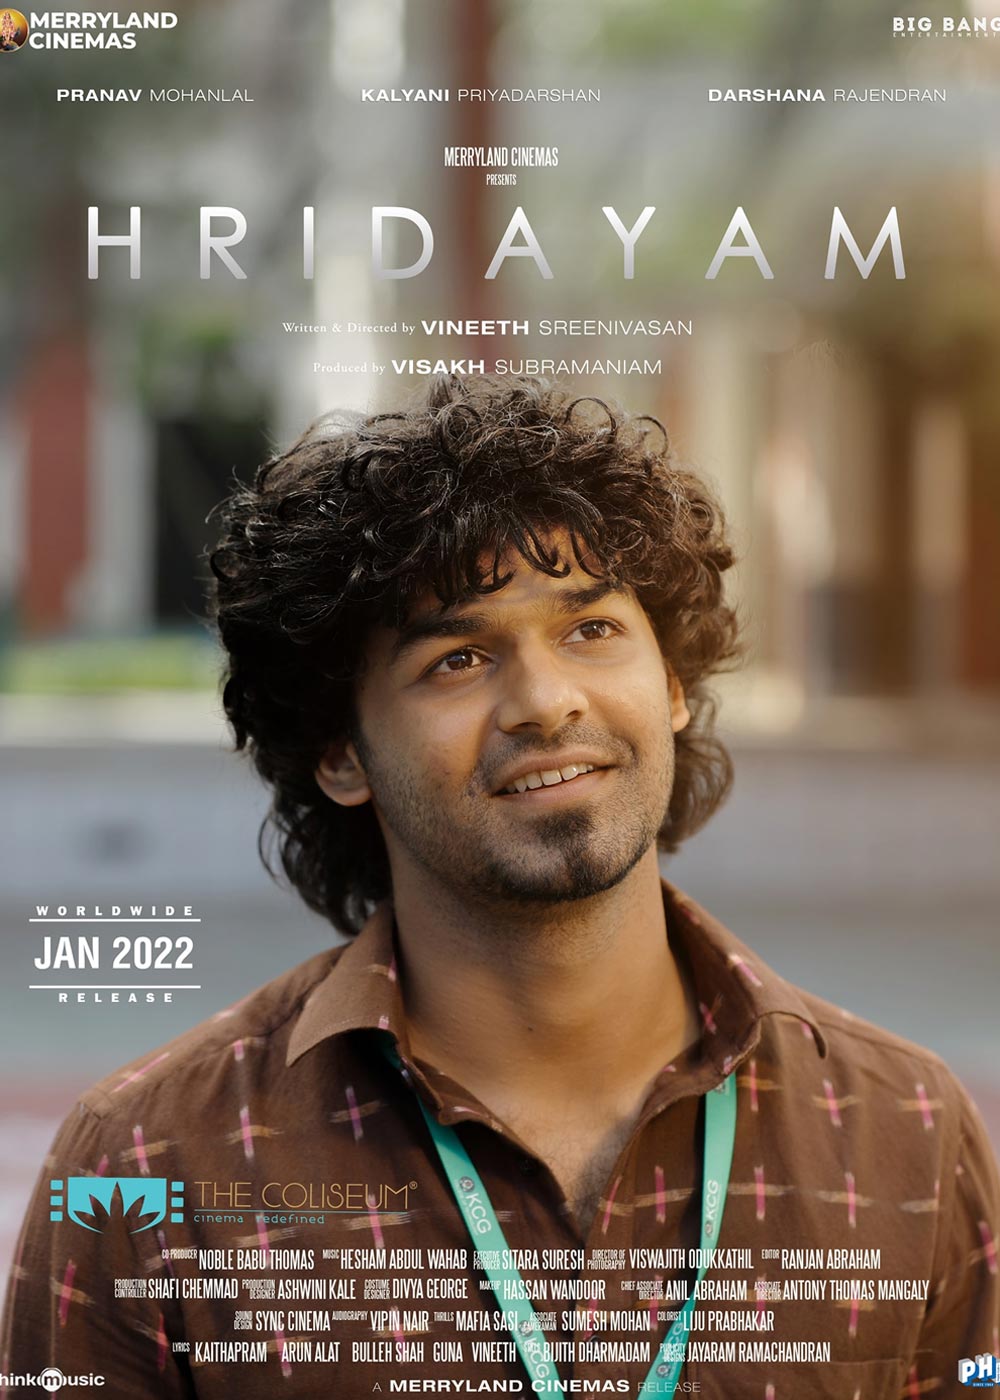 Teaser for first song of 'Hridayam' is out, gets warm response - CINEMA -  CINE NEWS | Kerala Kaumudi Online